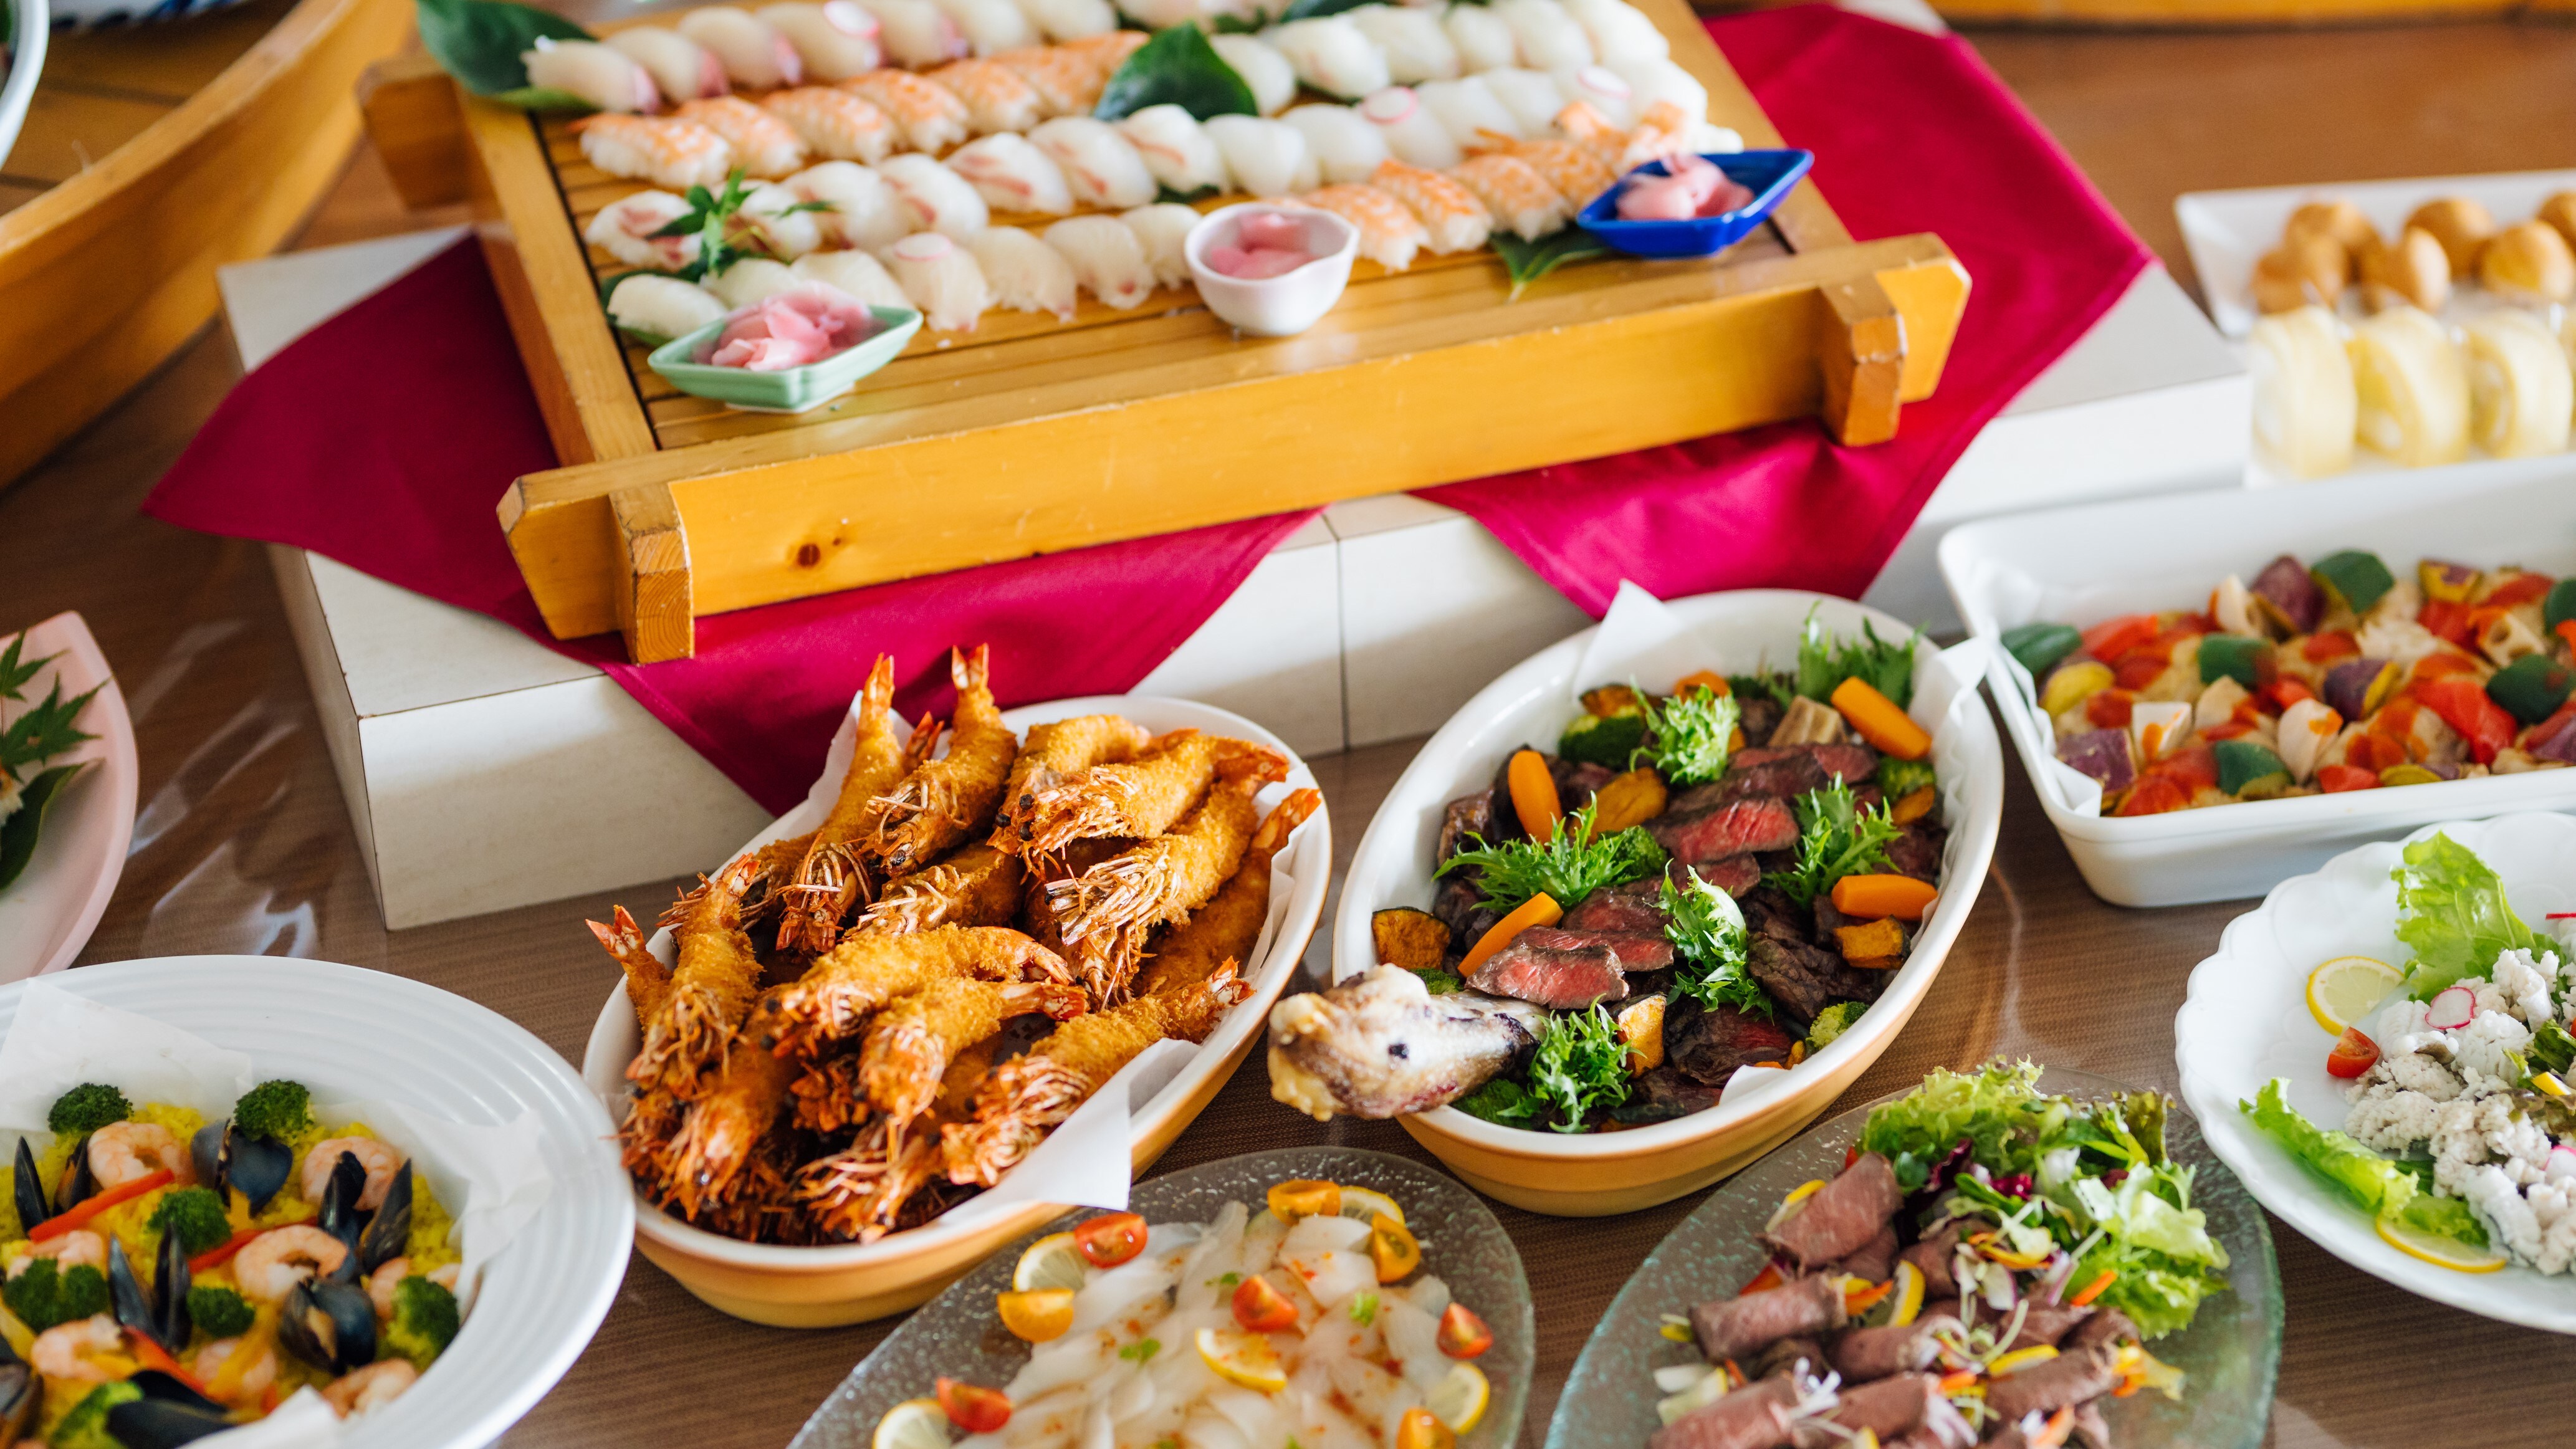 [Dinner buffet] A variety of dishes are popular